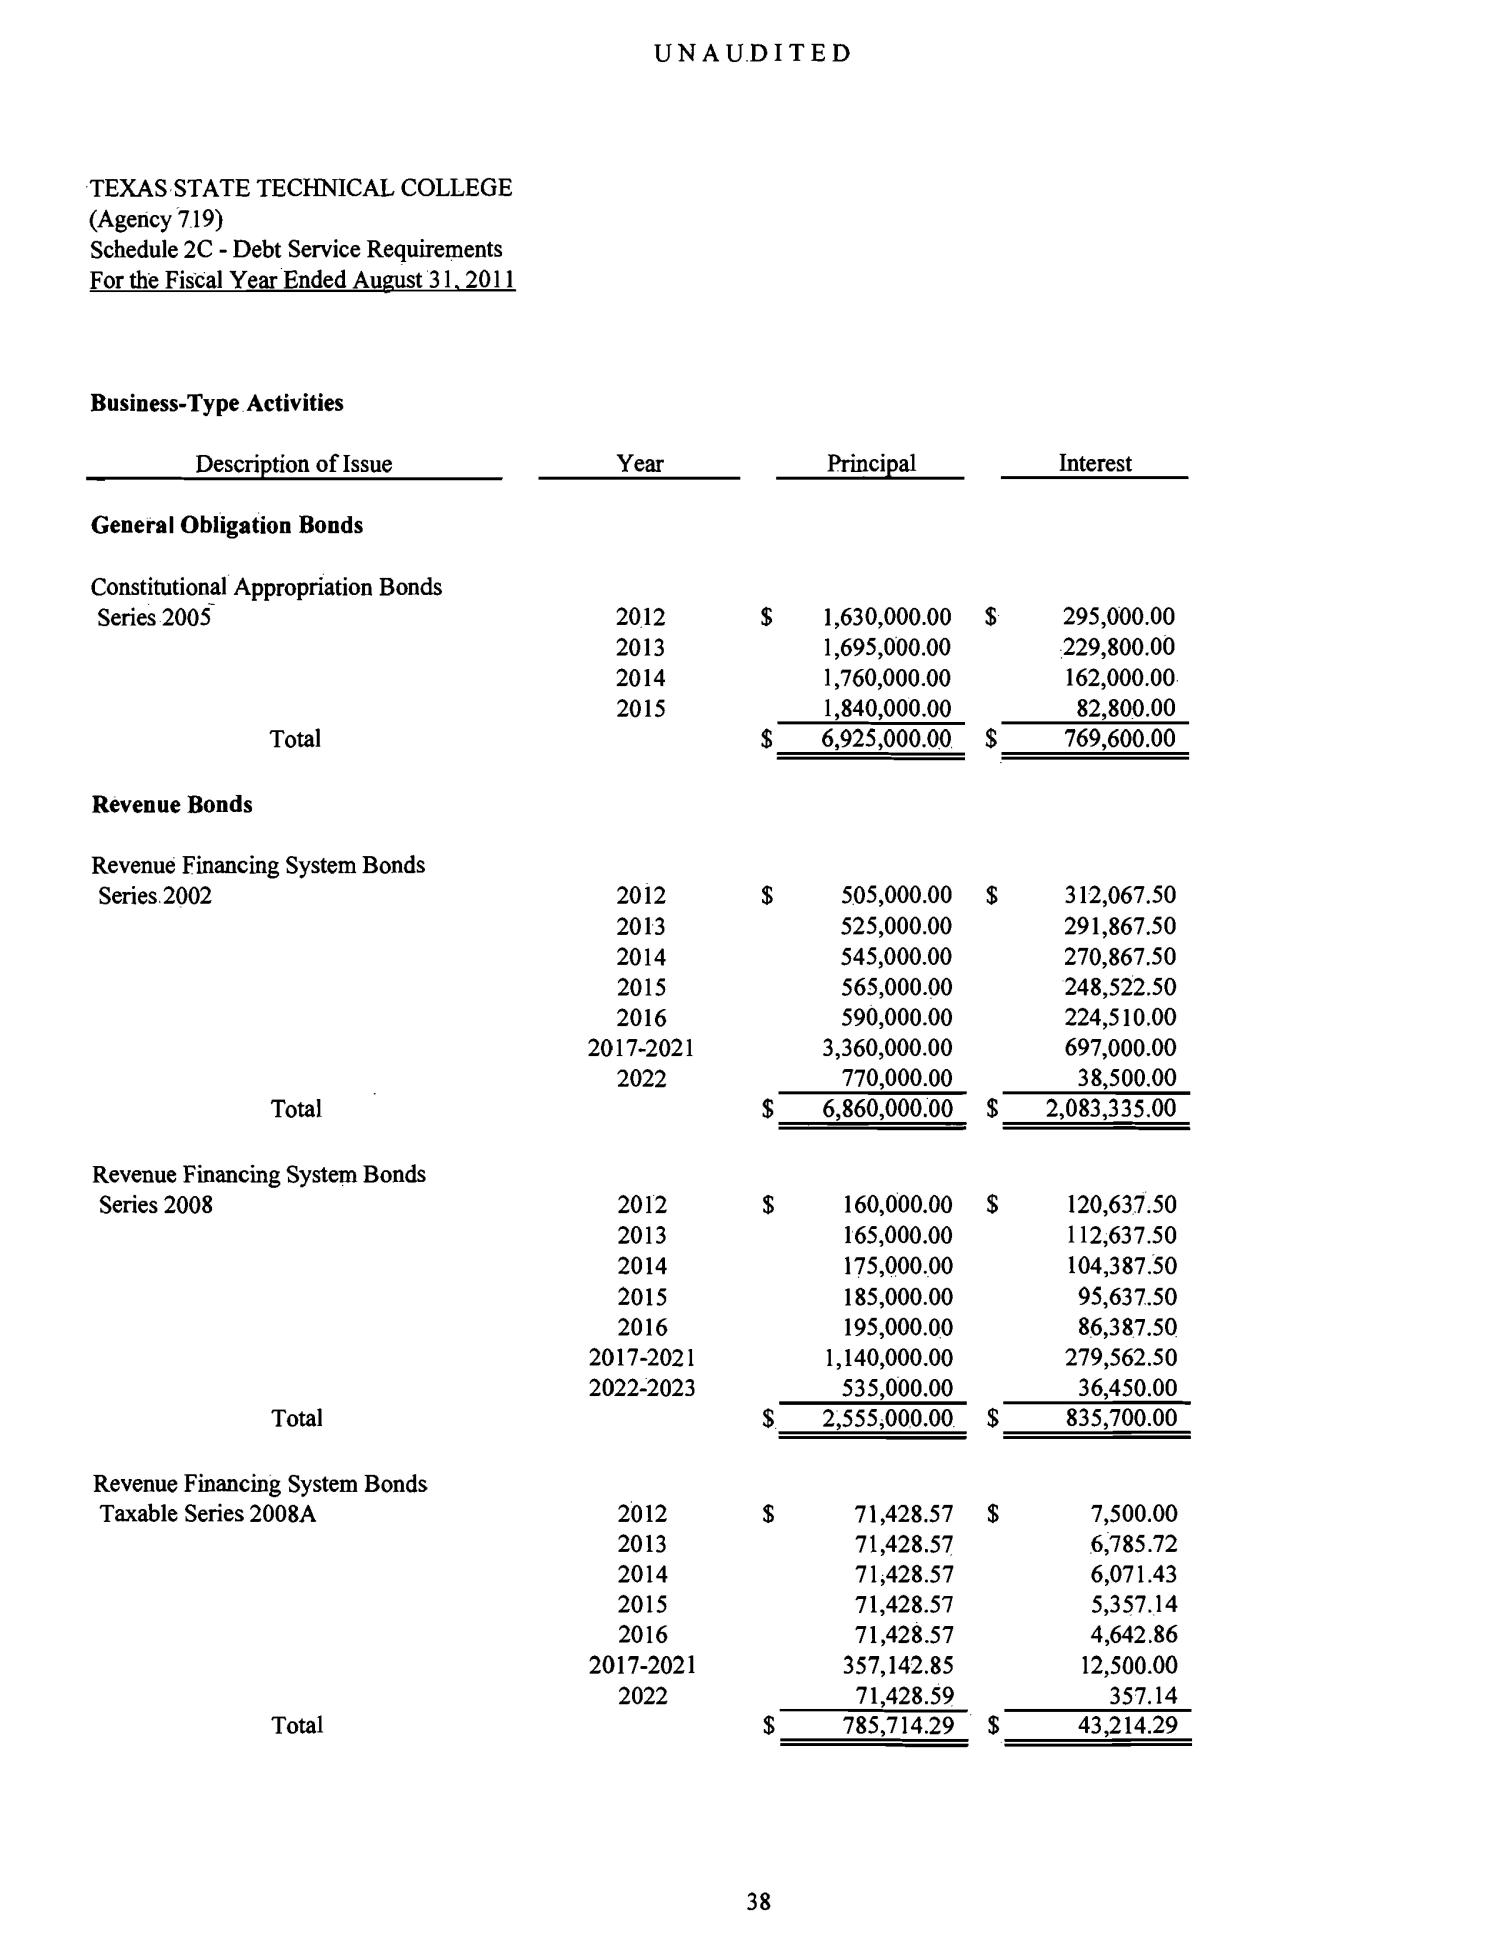 Texas State Technical College System Annual Financial Report: 2011
                                                
                                                    38
                                                